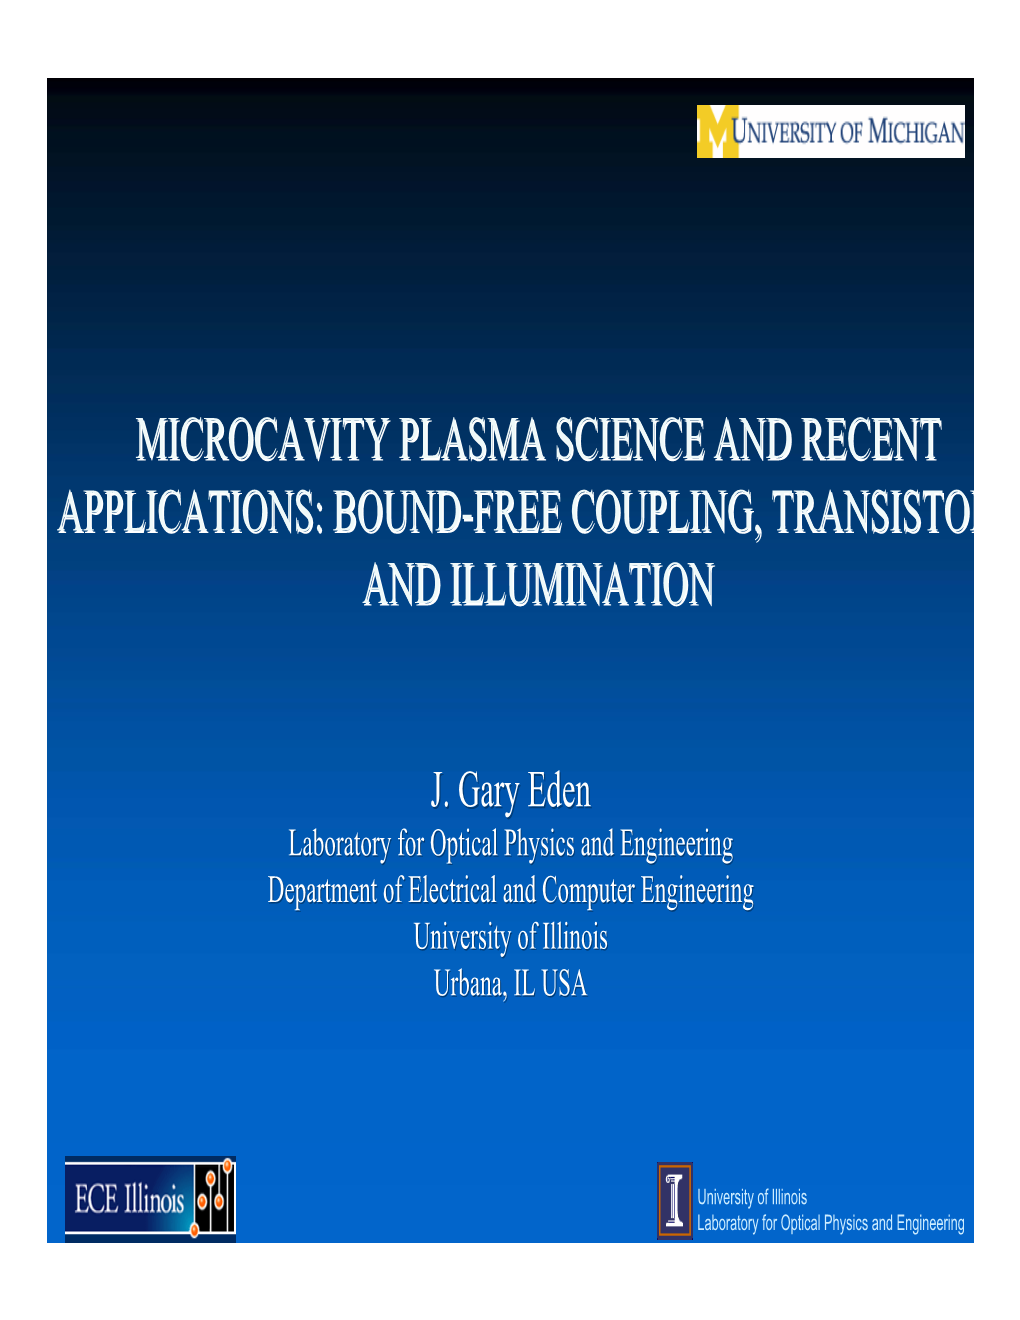 Microcavity Plasma Science and Recent Applications